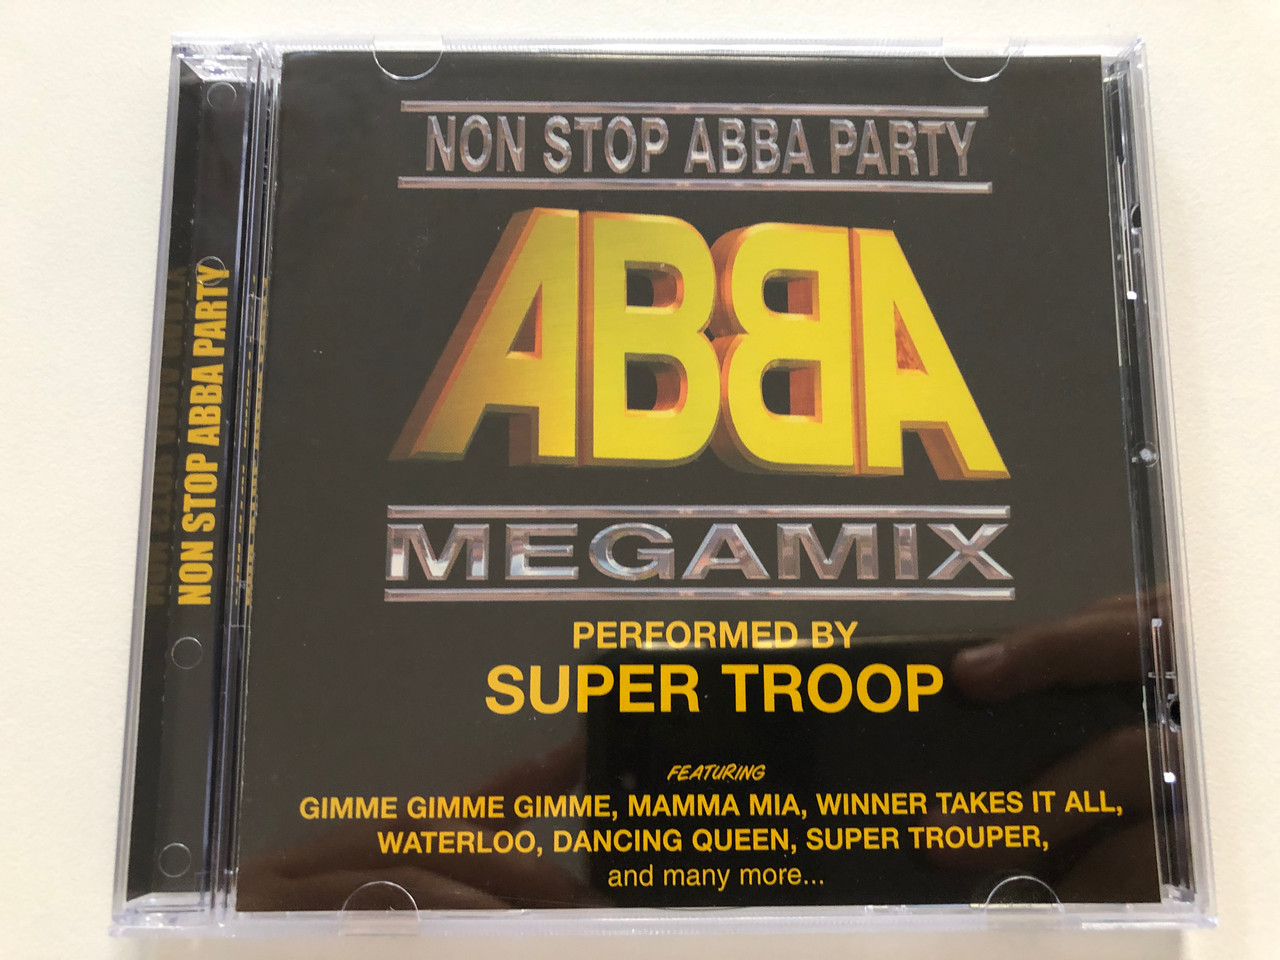 https://cdn10.bigcommerce.com/s-62bdpkt7pb/products/30922/images/182354/Non_Stop_Abba_Party_-_ABBA_Megamix_Performed_by_Super_Troop_Featuring_Gimme_Gimme_Gimme_Mamma_Mia_Winner_Takes_It_All_Waterloo_Dancing_Queen_Super_Trouper_and_many_more..._A-Play_Aud_1__83811.1624471263.1280.1280.JPG?c=2